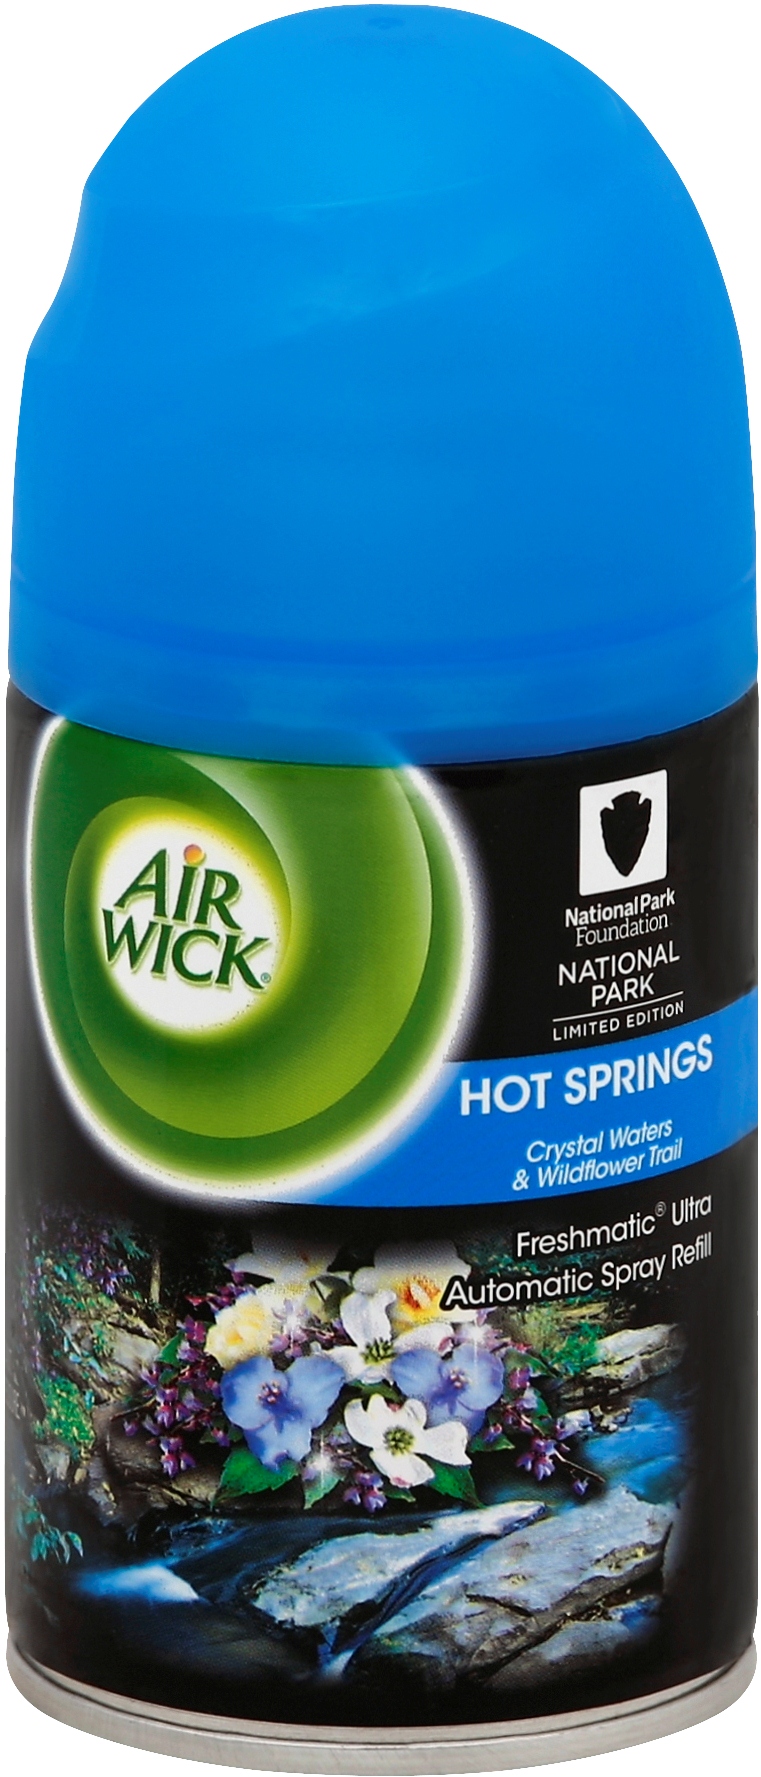 AIR WICK® FRESHMATIC® - Hot Springs Crystal Waters & Wildflower Trail (Discontinued)